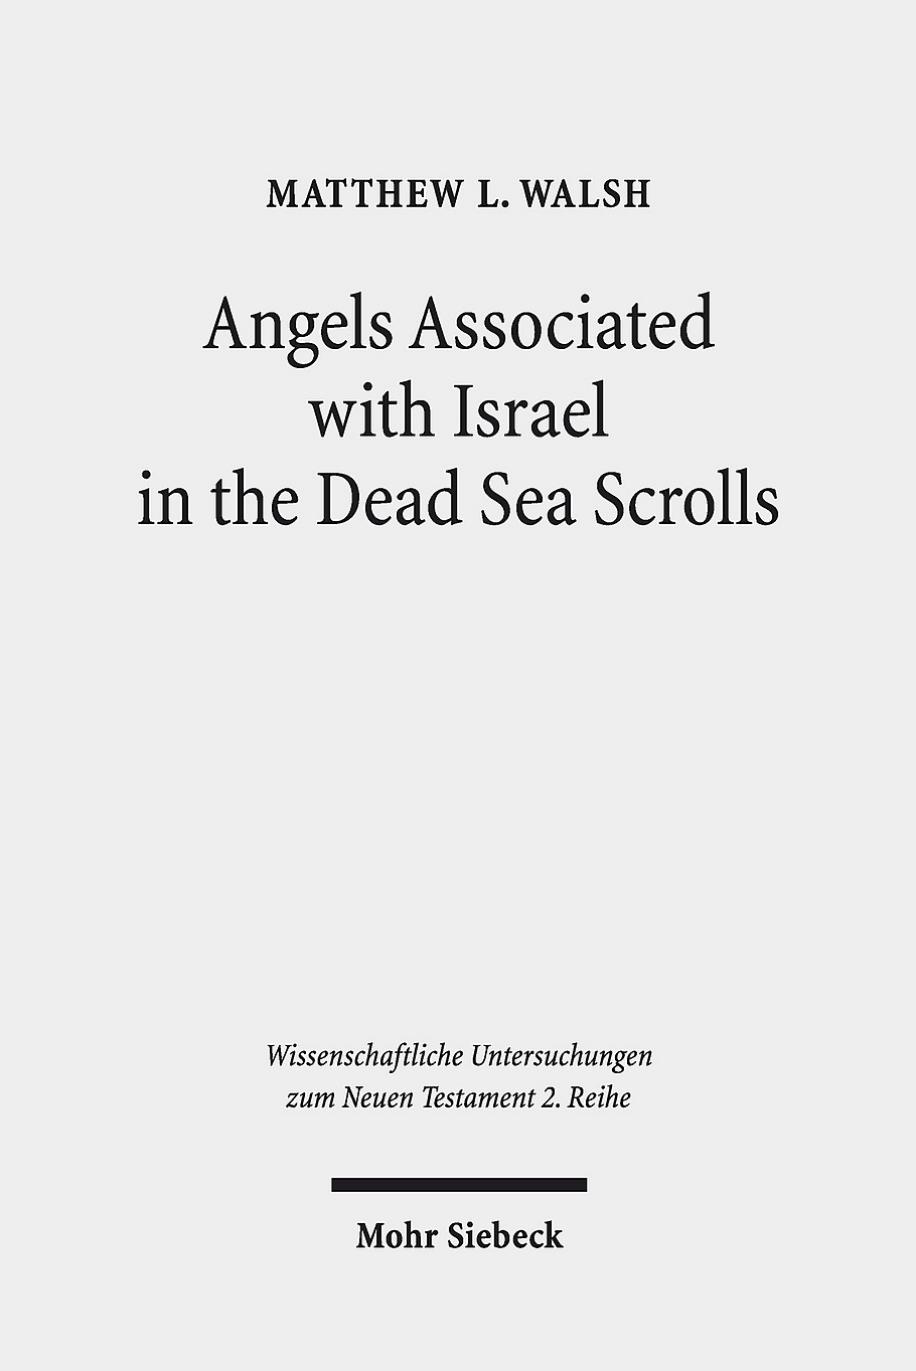 Angels Associated with Israel in the Dead Sea Scrolls: Angelology and Sectarian Identity at Qumran by Matthew L. Walsh